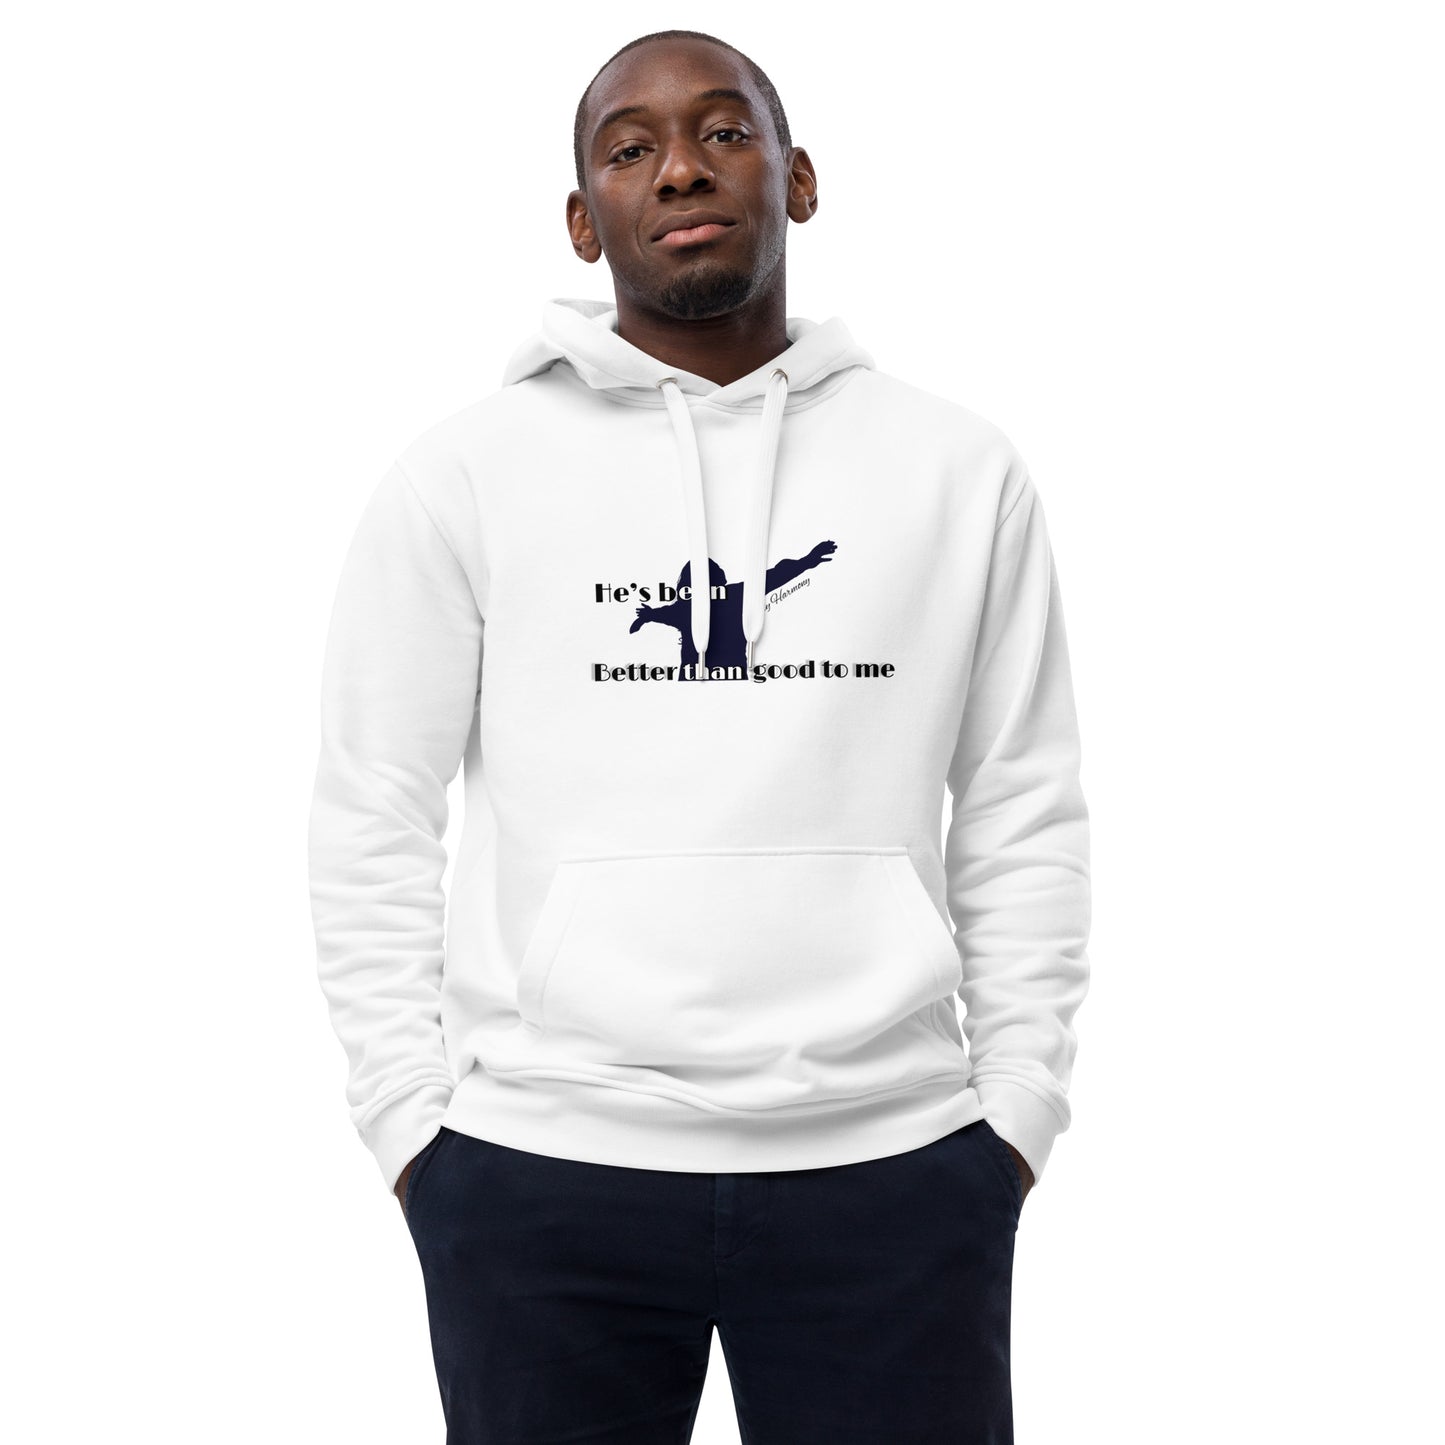 Better than good to me hoodie (white)